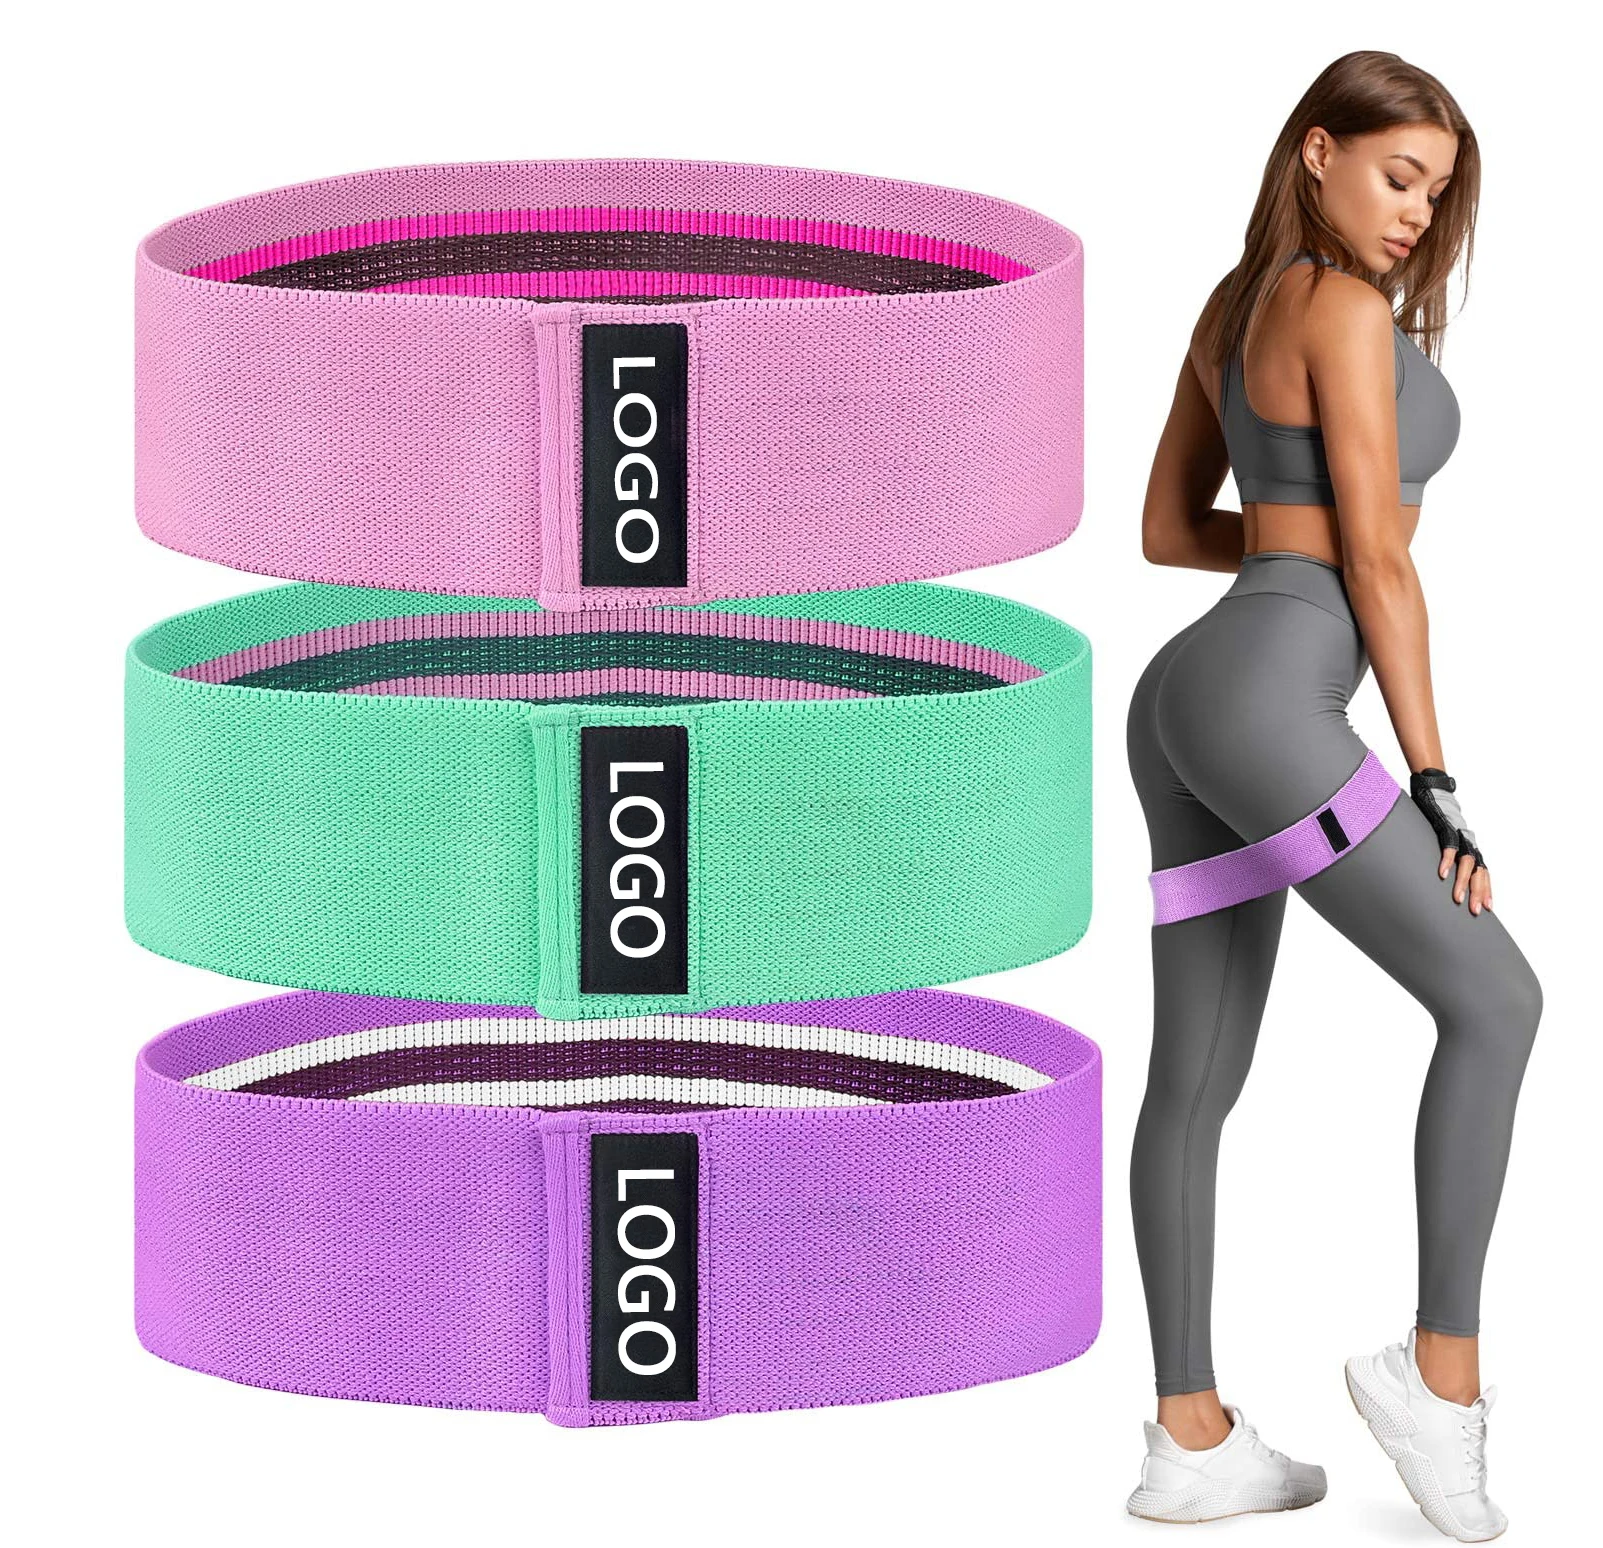 

Ejercicio Bandas De Resistencia Gym Home Yoga Equipment Elastic Exercise Fitness Bands Fabric Booty Resistance Bands For Workout, As picture